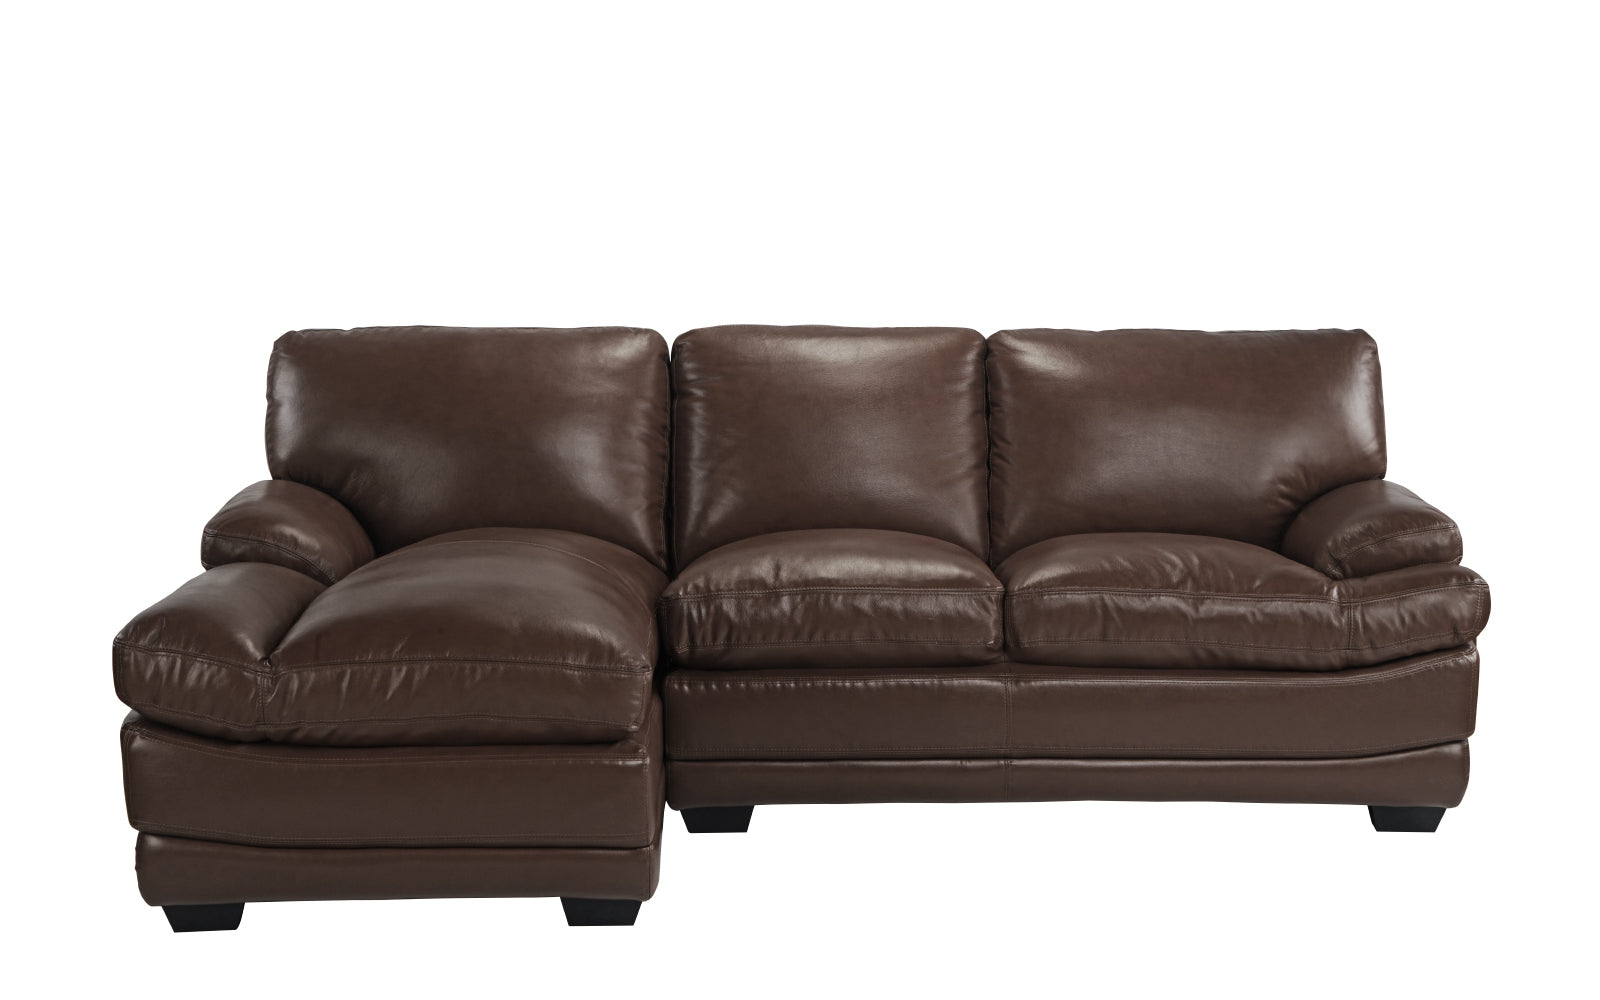 Palmira Minimalistic Leather Match Sectional with Left Chaise